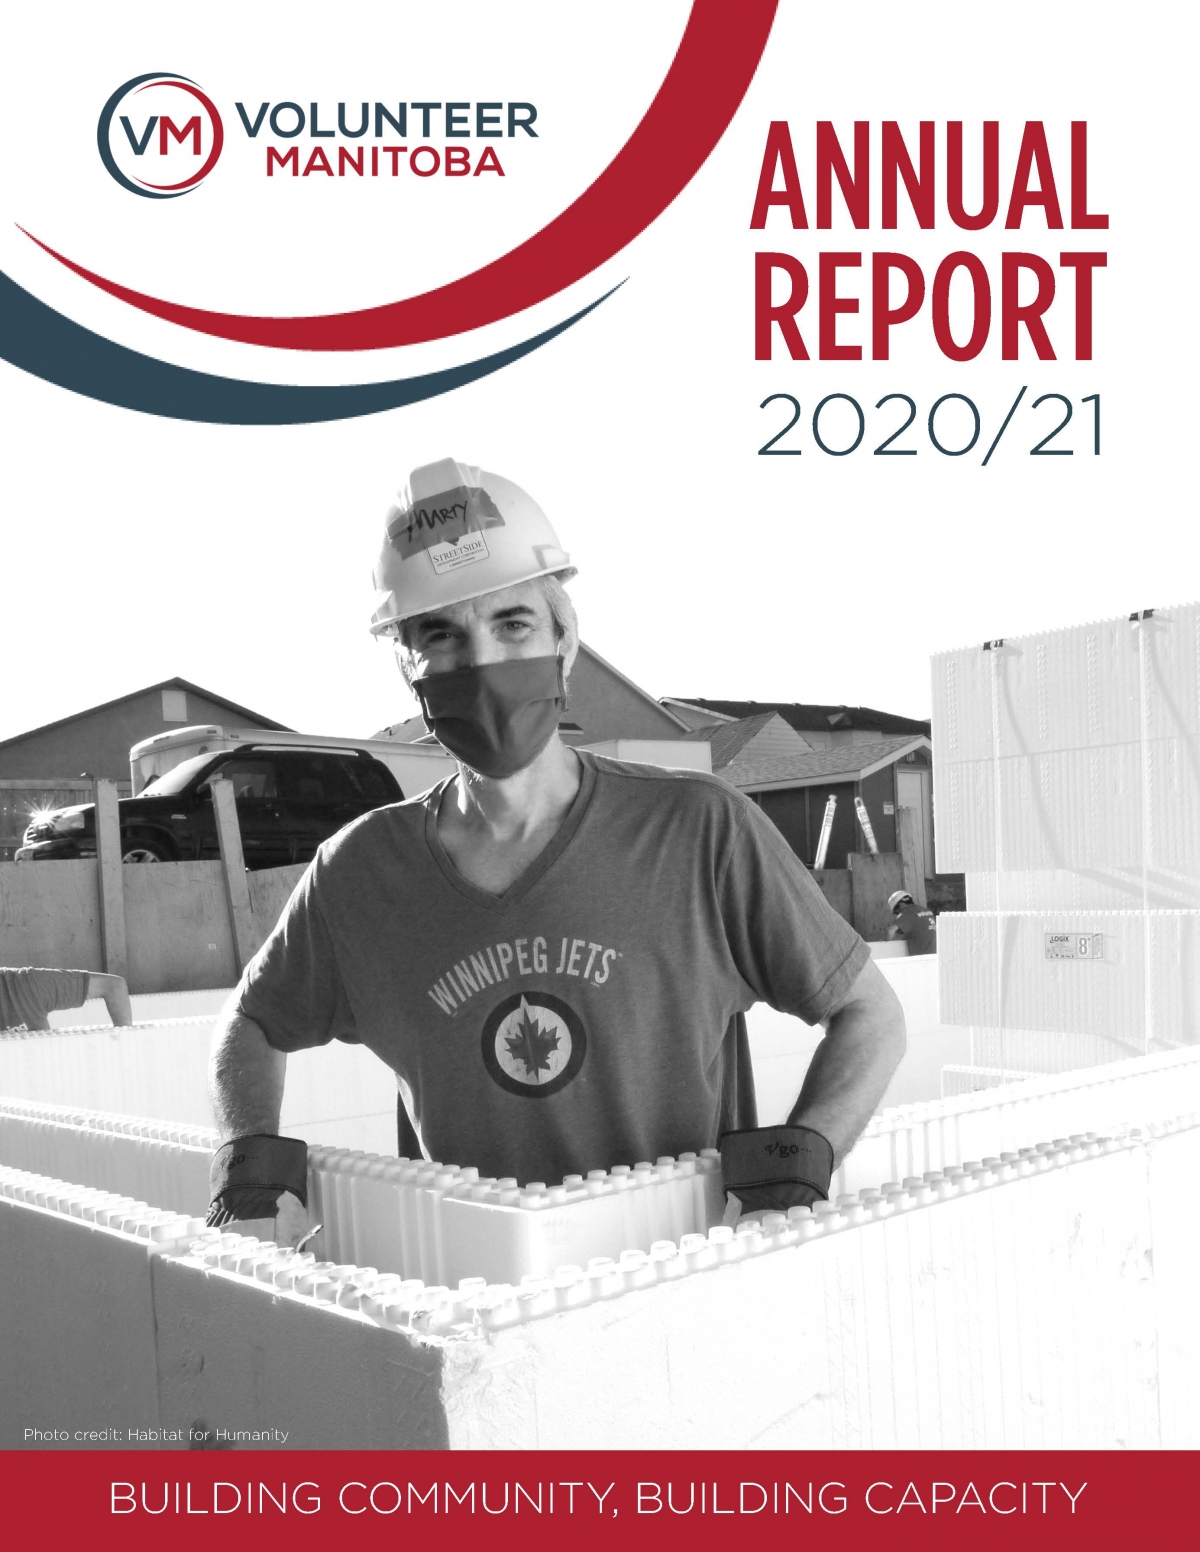 Link to pdf of Annual Report 2020-2021